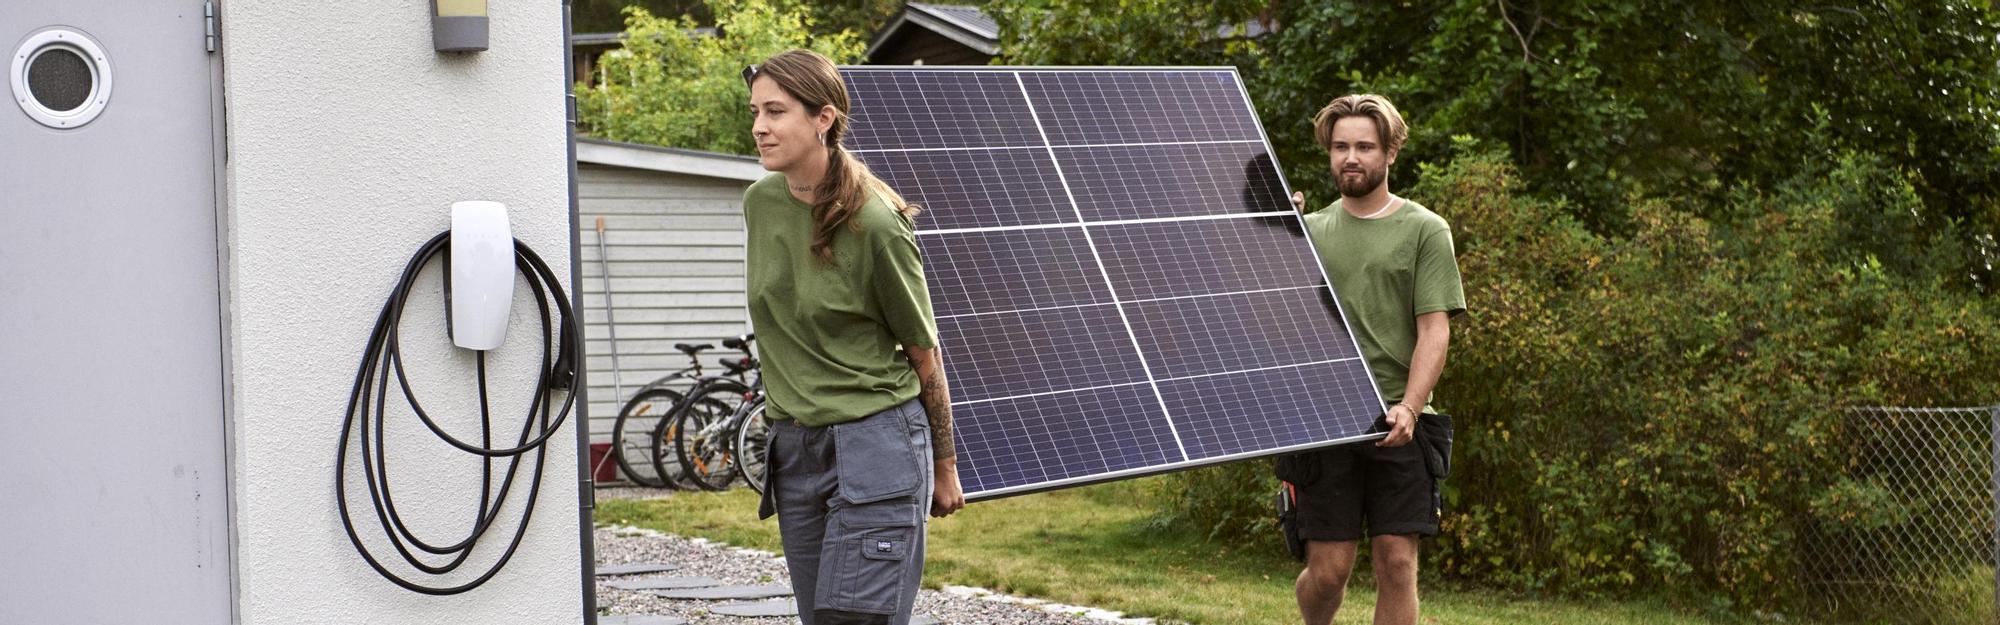 Two workers carrying solar panel together